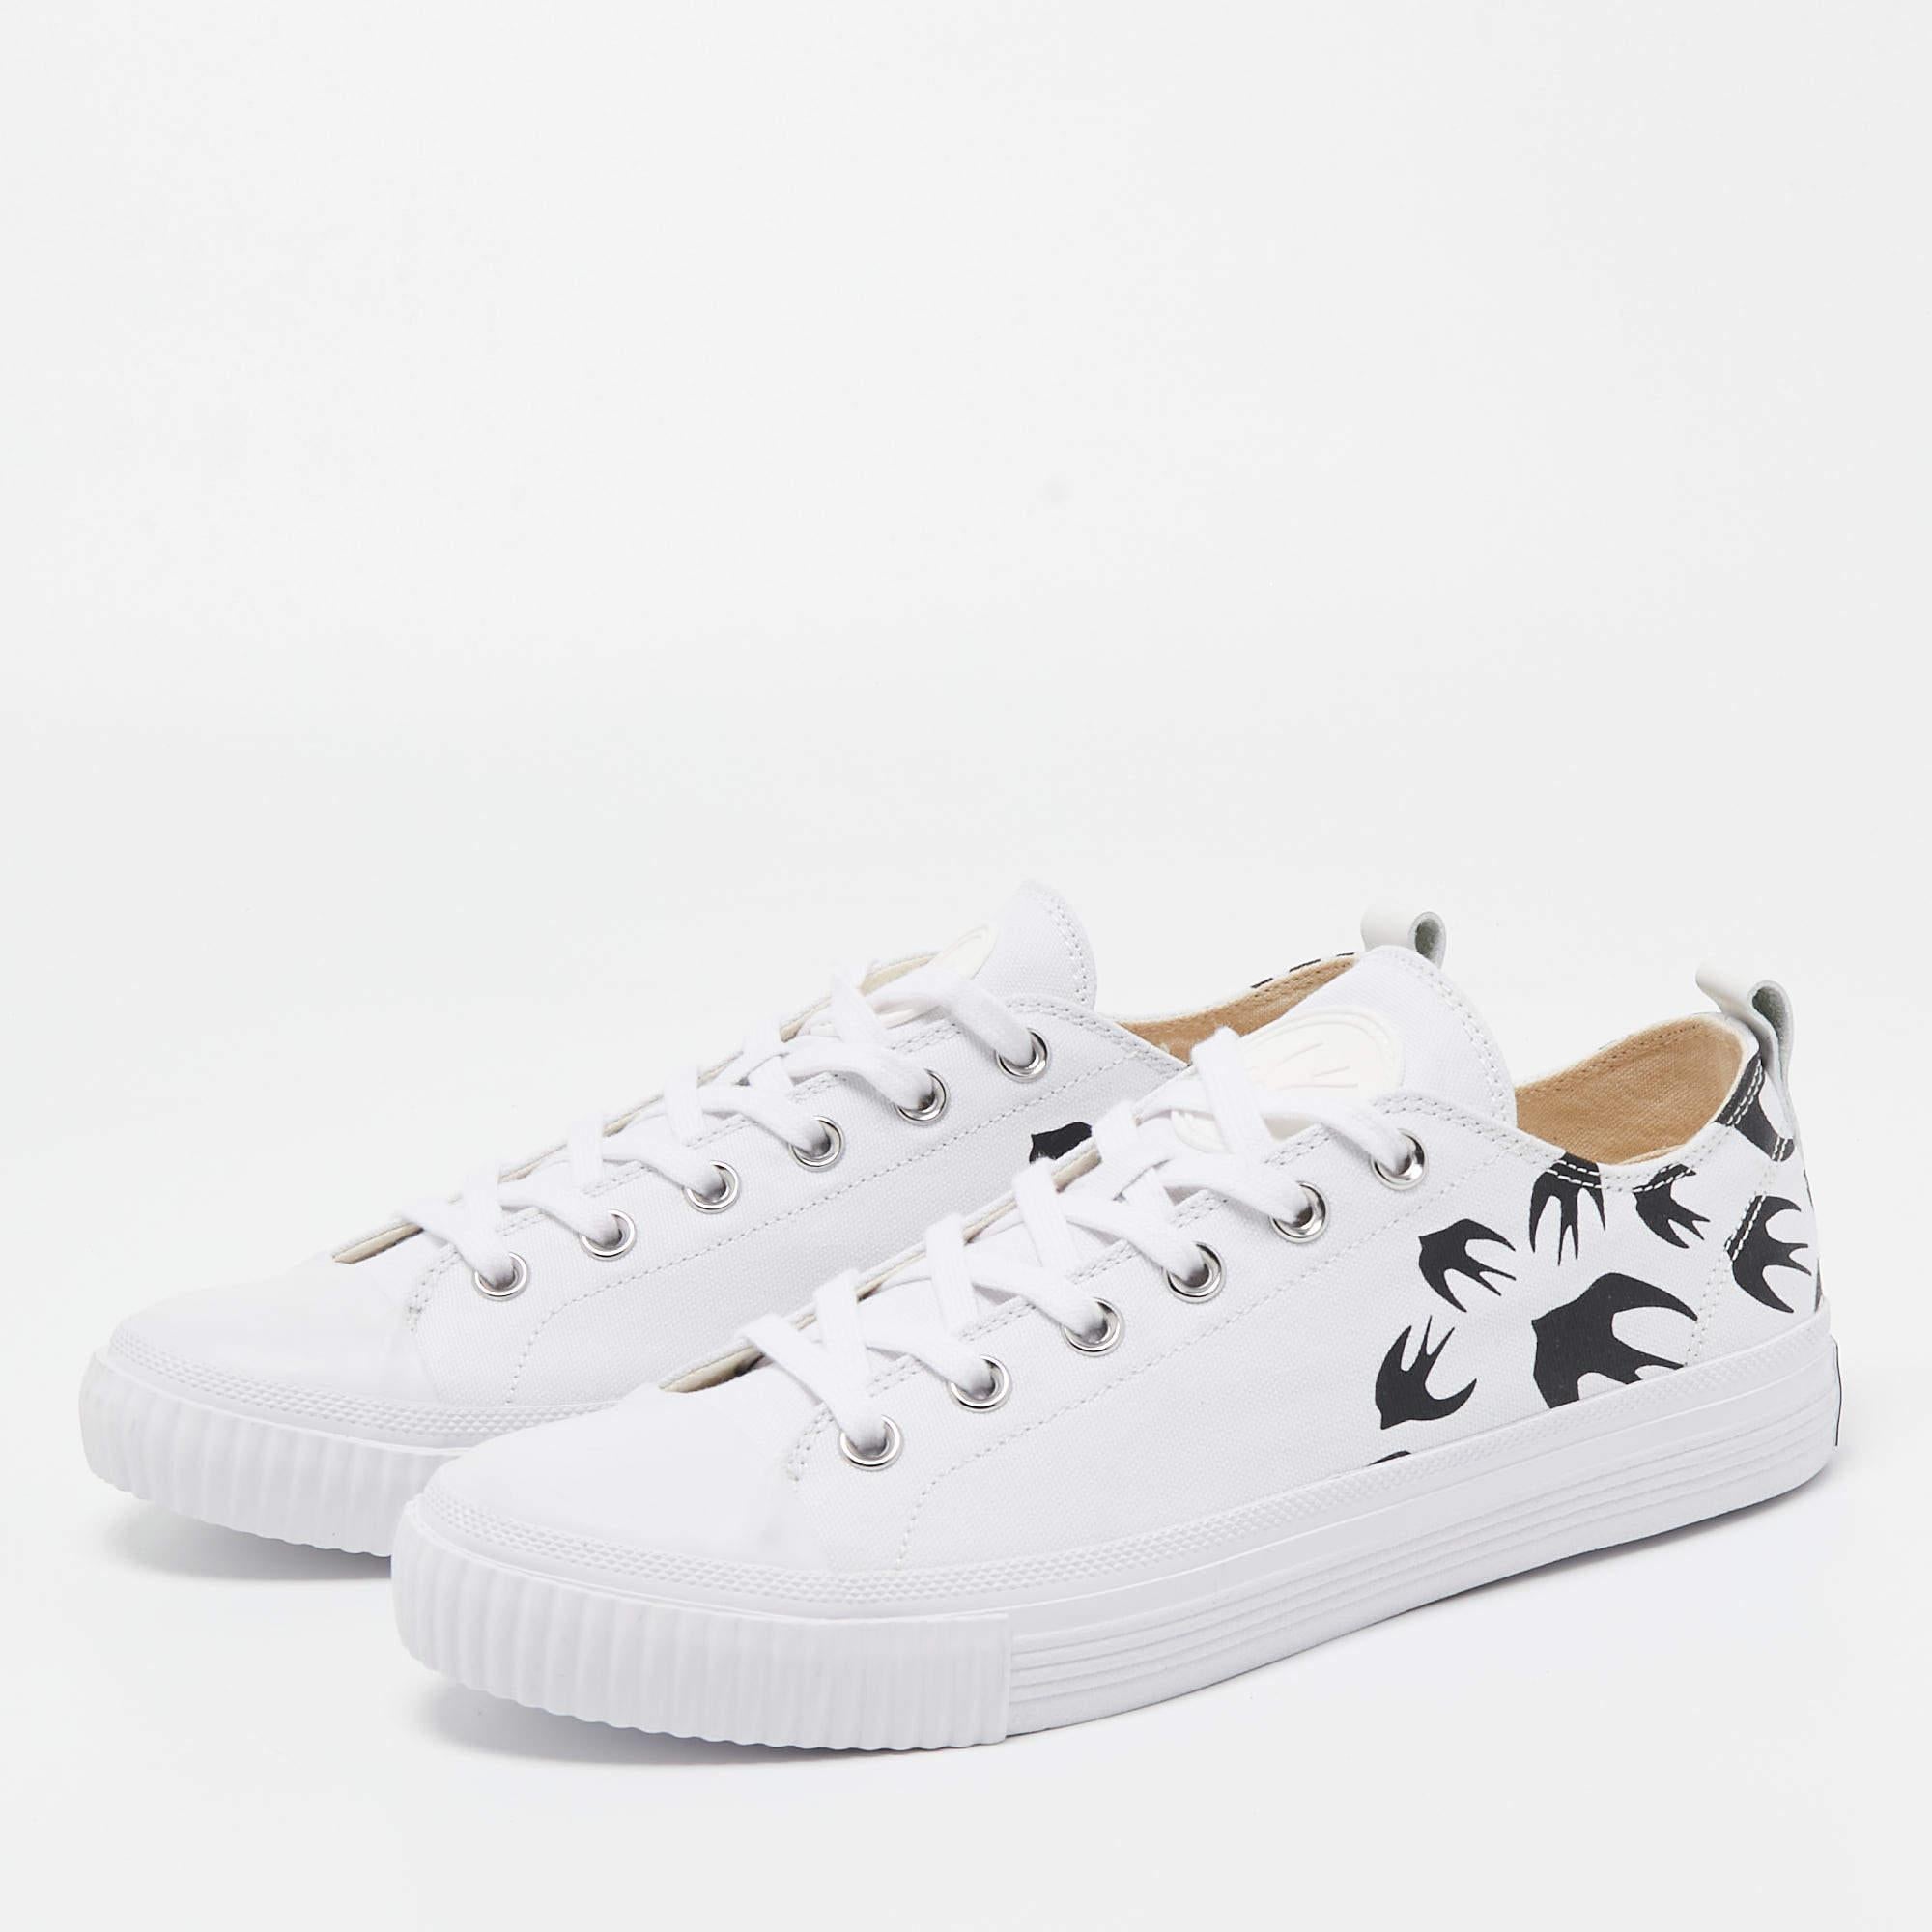 McQ by Alexander McQueen White Canvas Low Top Sneakers Size 42 3